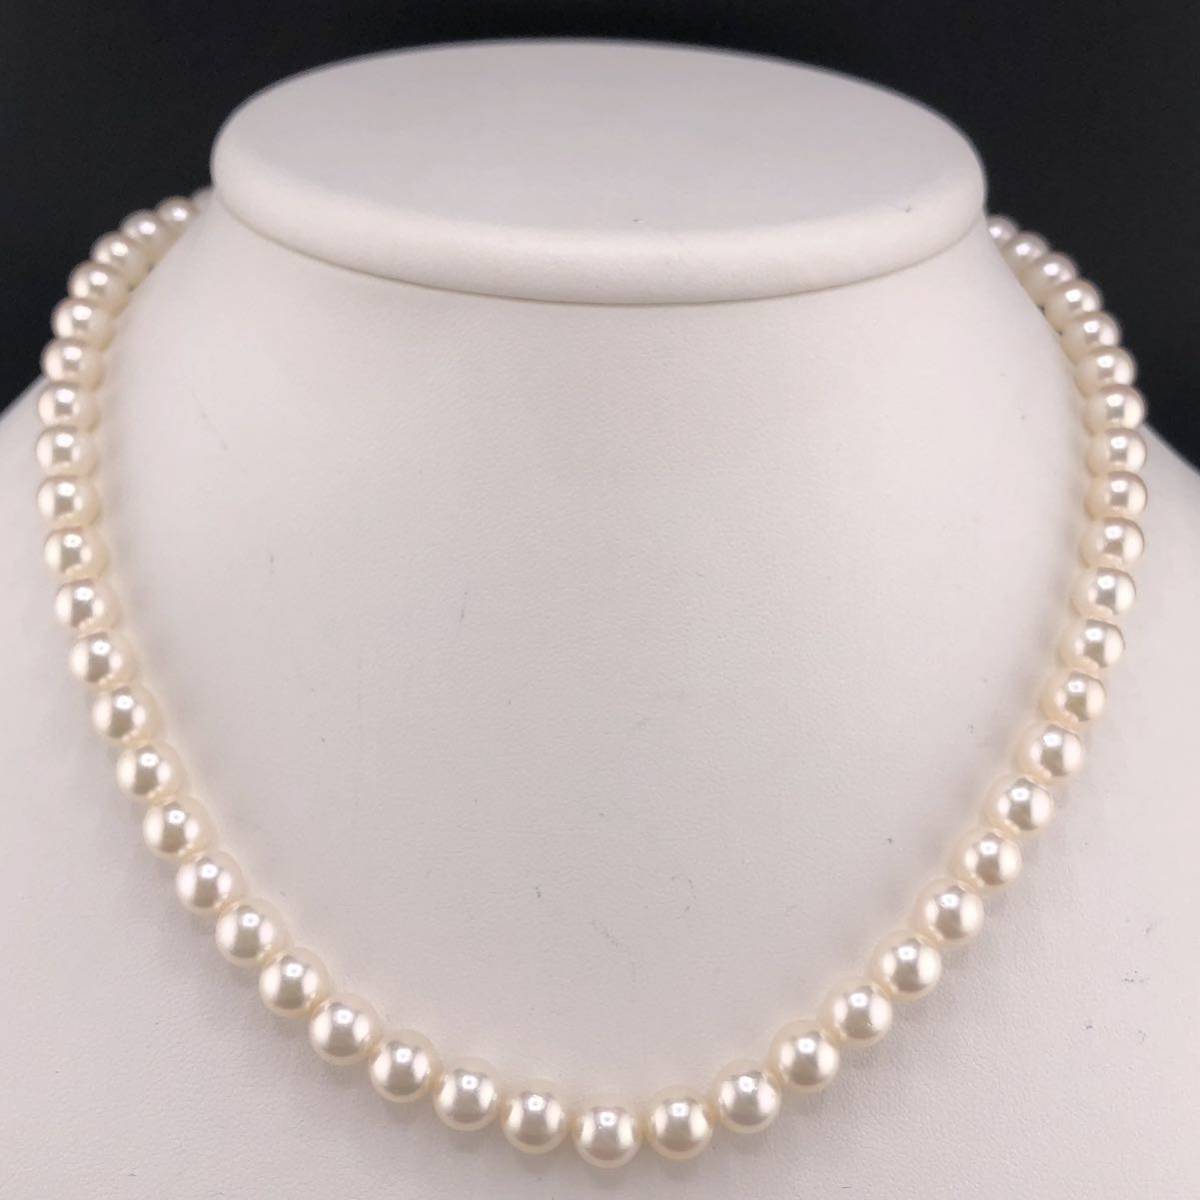 E02-5123☆☆☆アコヤパールネックレス 6.5mm~7.0mm 41cm 30g ( アコヤ真珠 Pearl necklace SILVER )_画像1